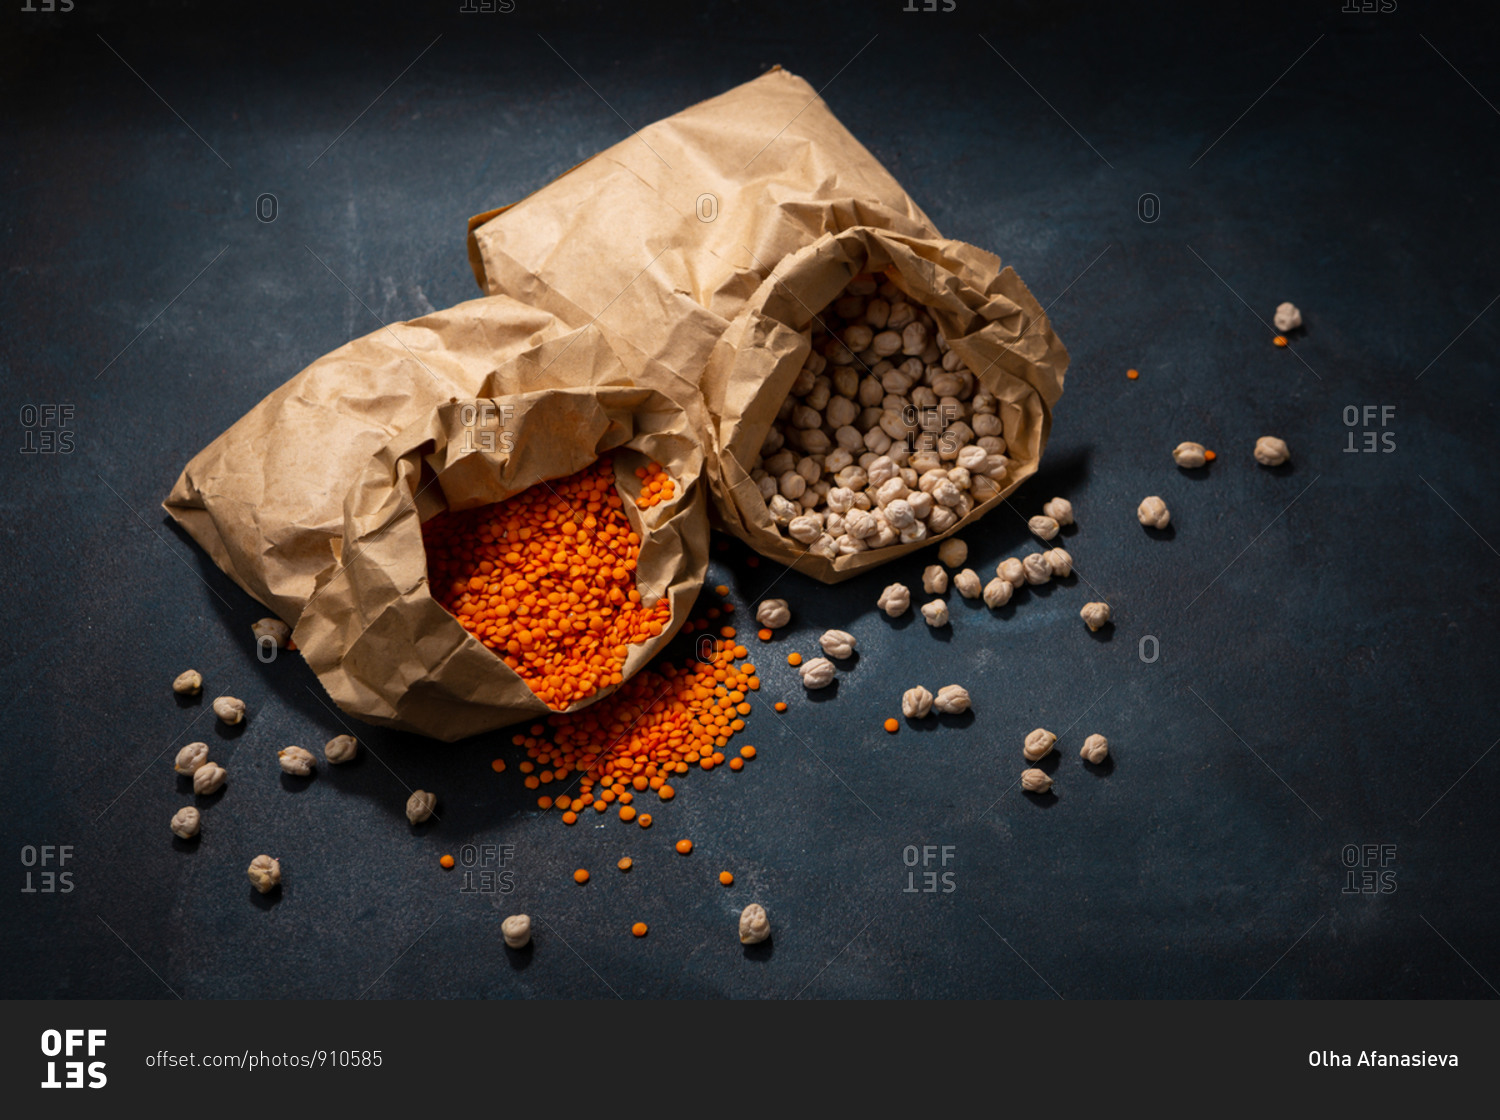 Chickpeas and red lentils in paper bags  on dark surface